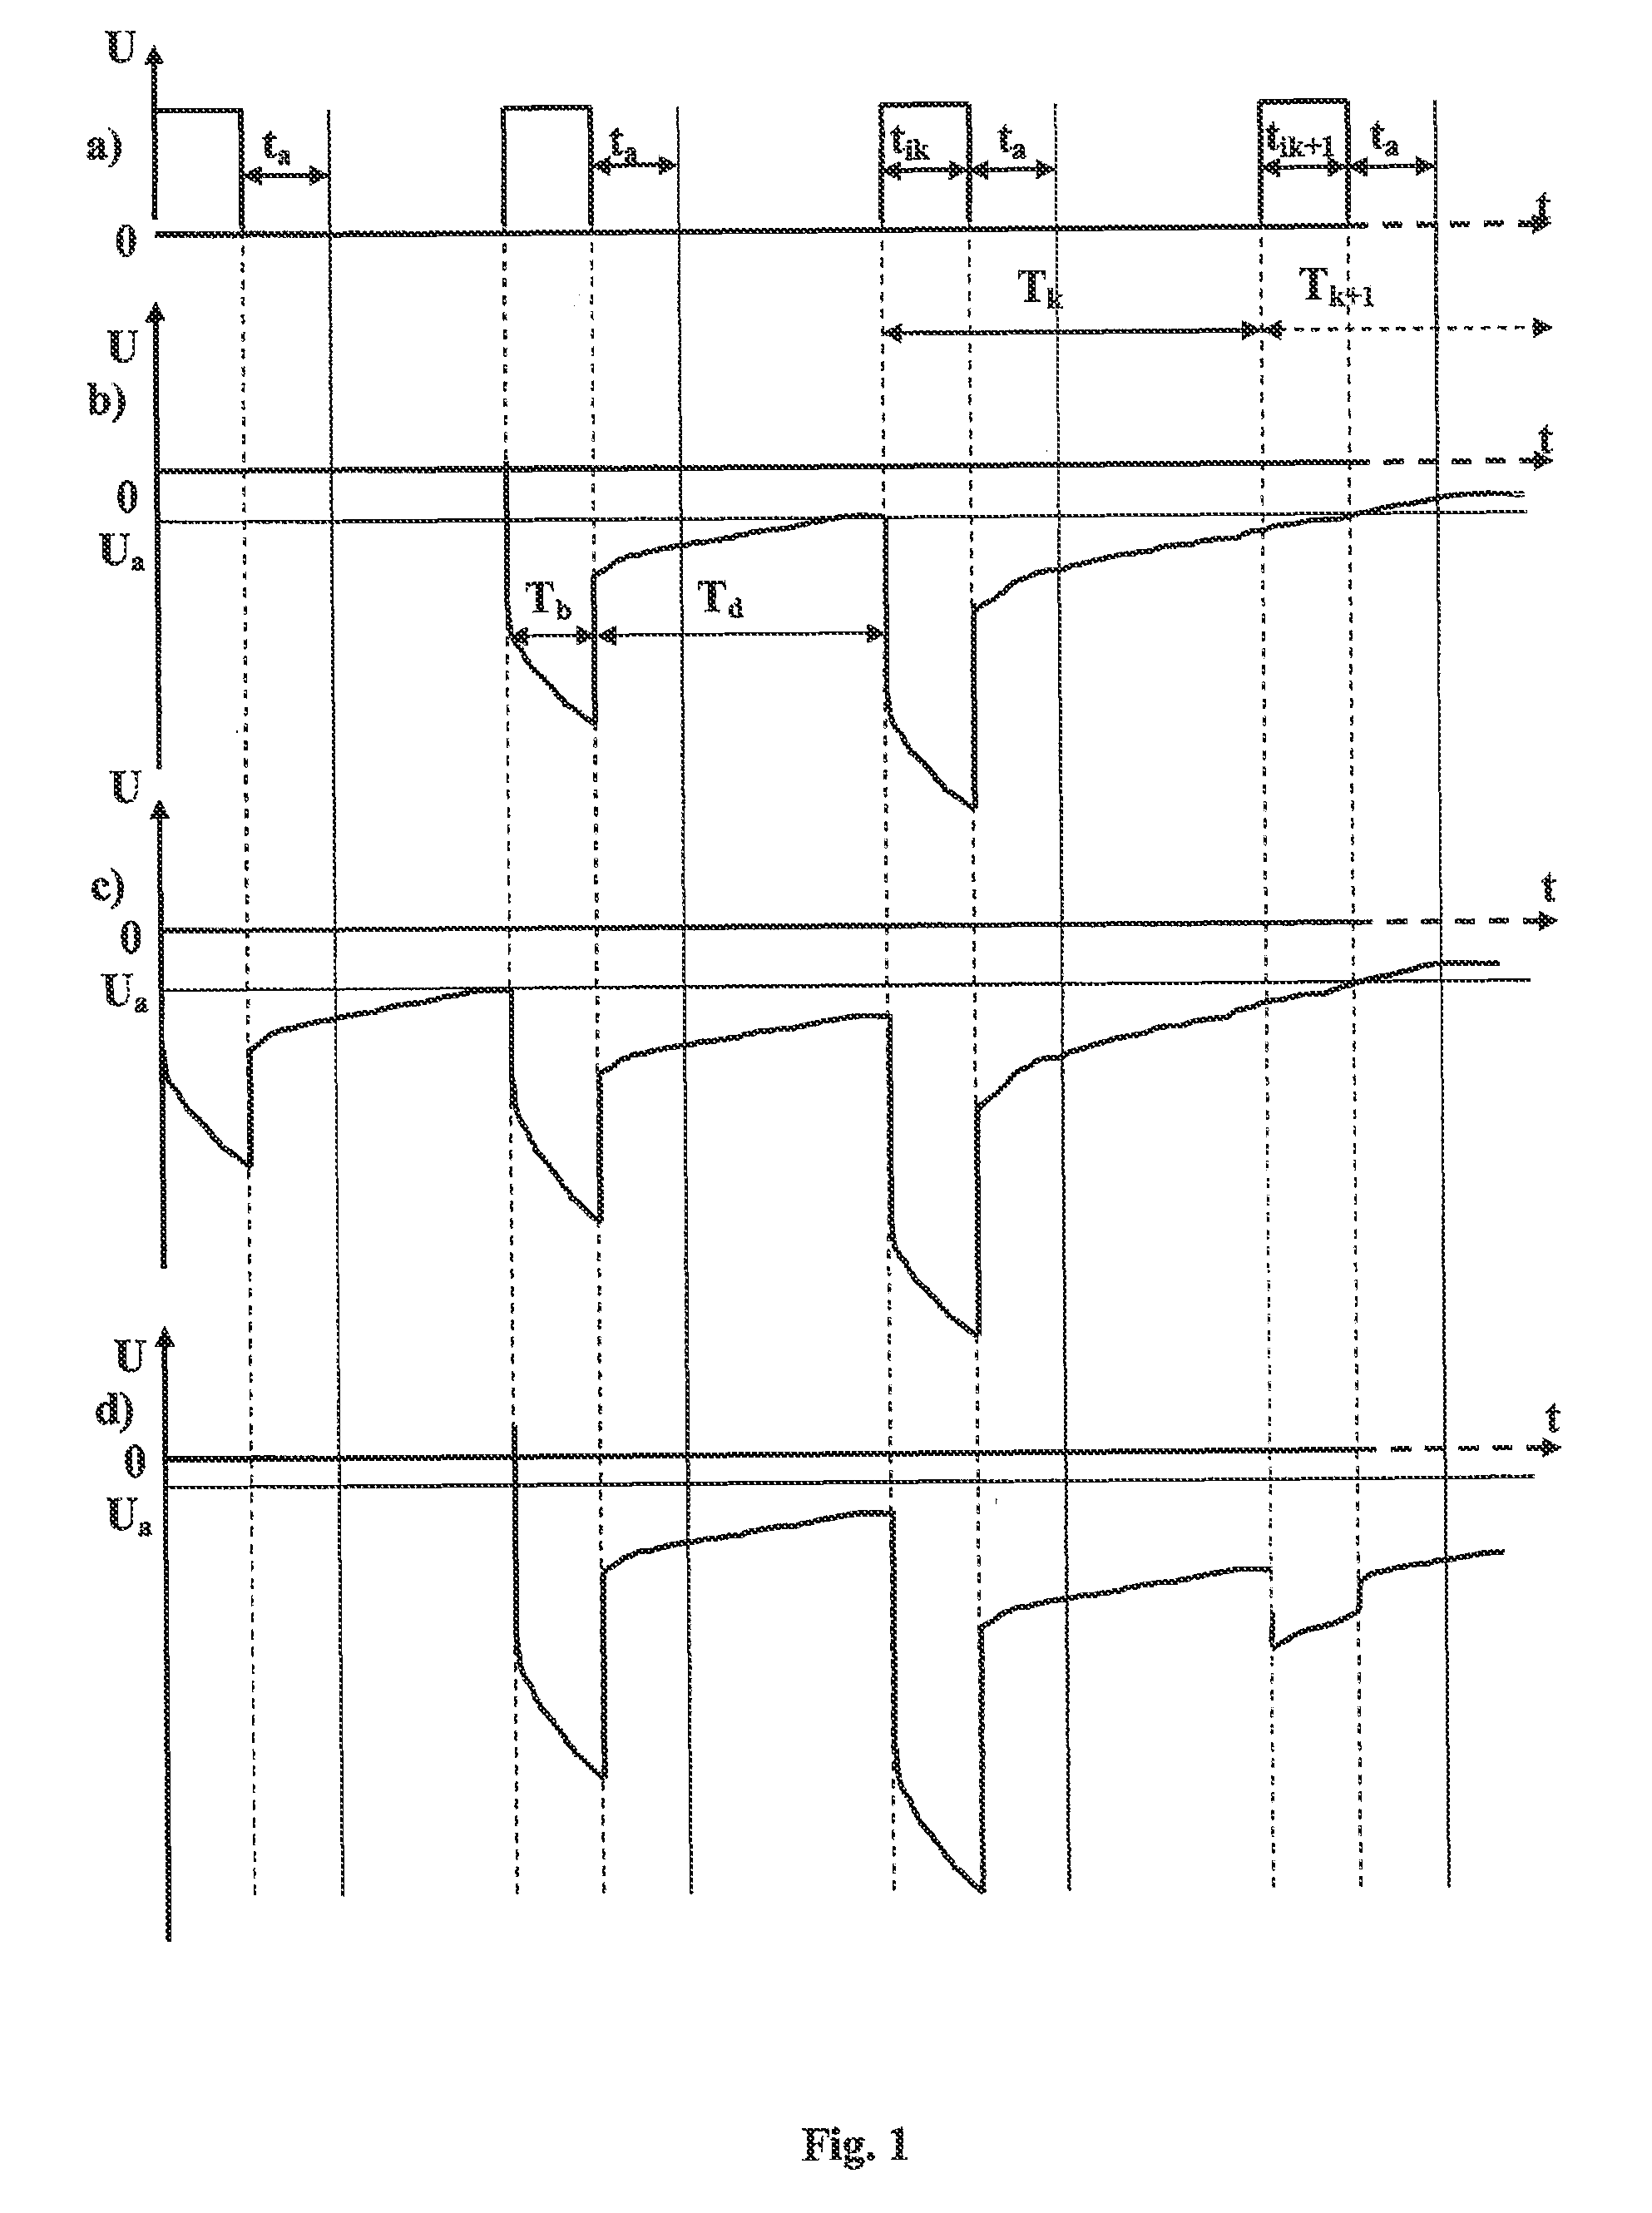 Method for separating minerals with the aid of X-ray luminescence